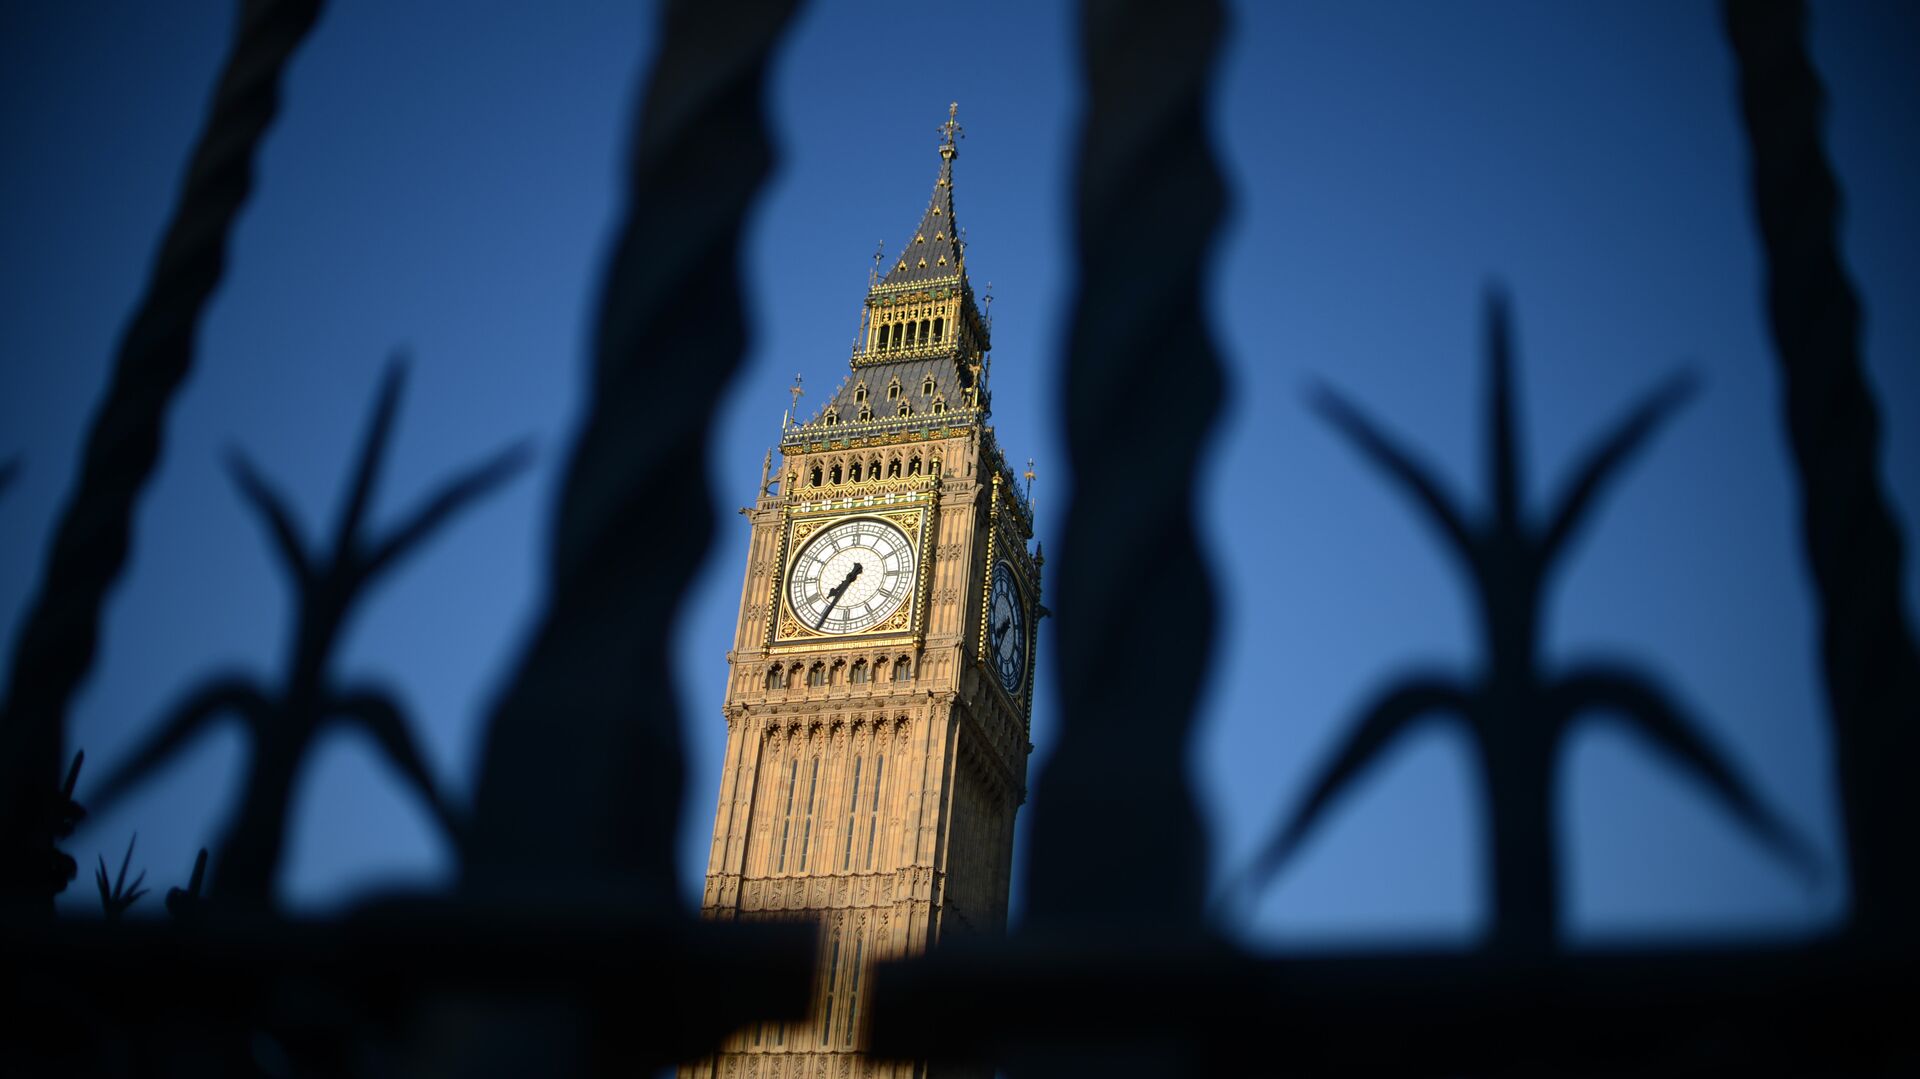 The Big Ben clock Tower is pictured in central London on July 22, 2012, five days before the start of the London 2012 Olympic Games. - Sputnik Mundo, 1920, 03.05.2022